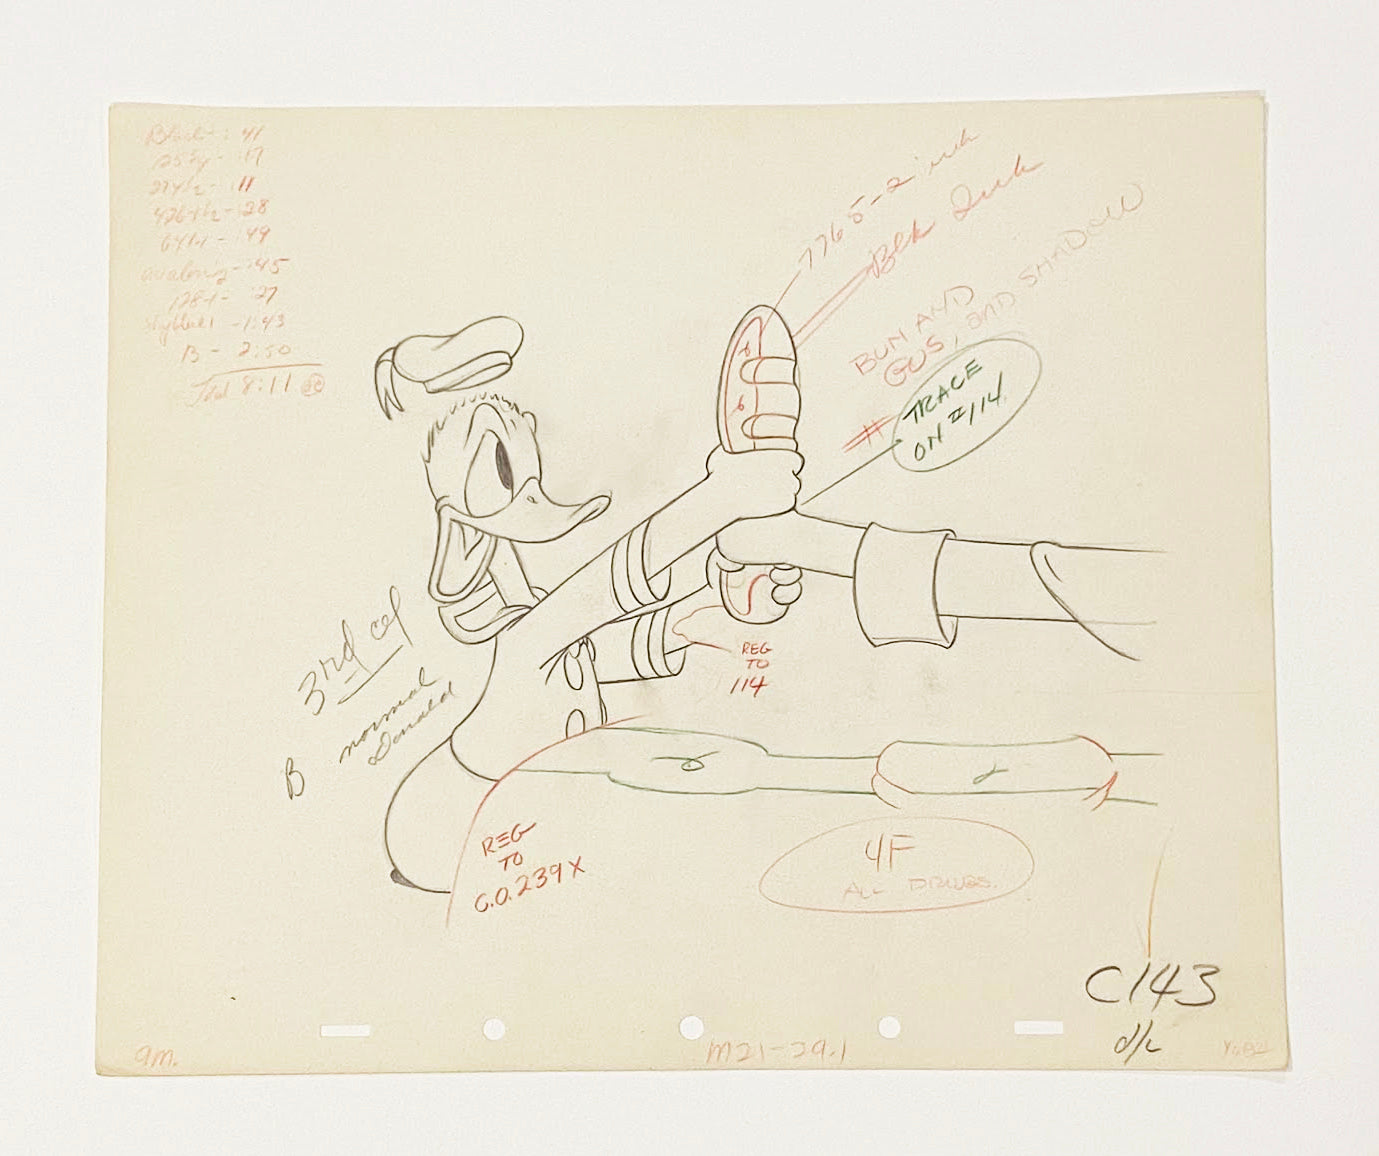 Original Walt Disney Production Drawing of Donald Duck from Donald's Cousin Gus (1939)